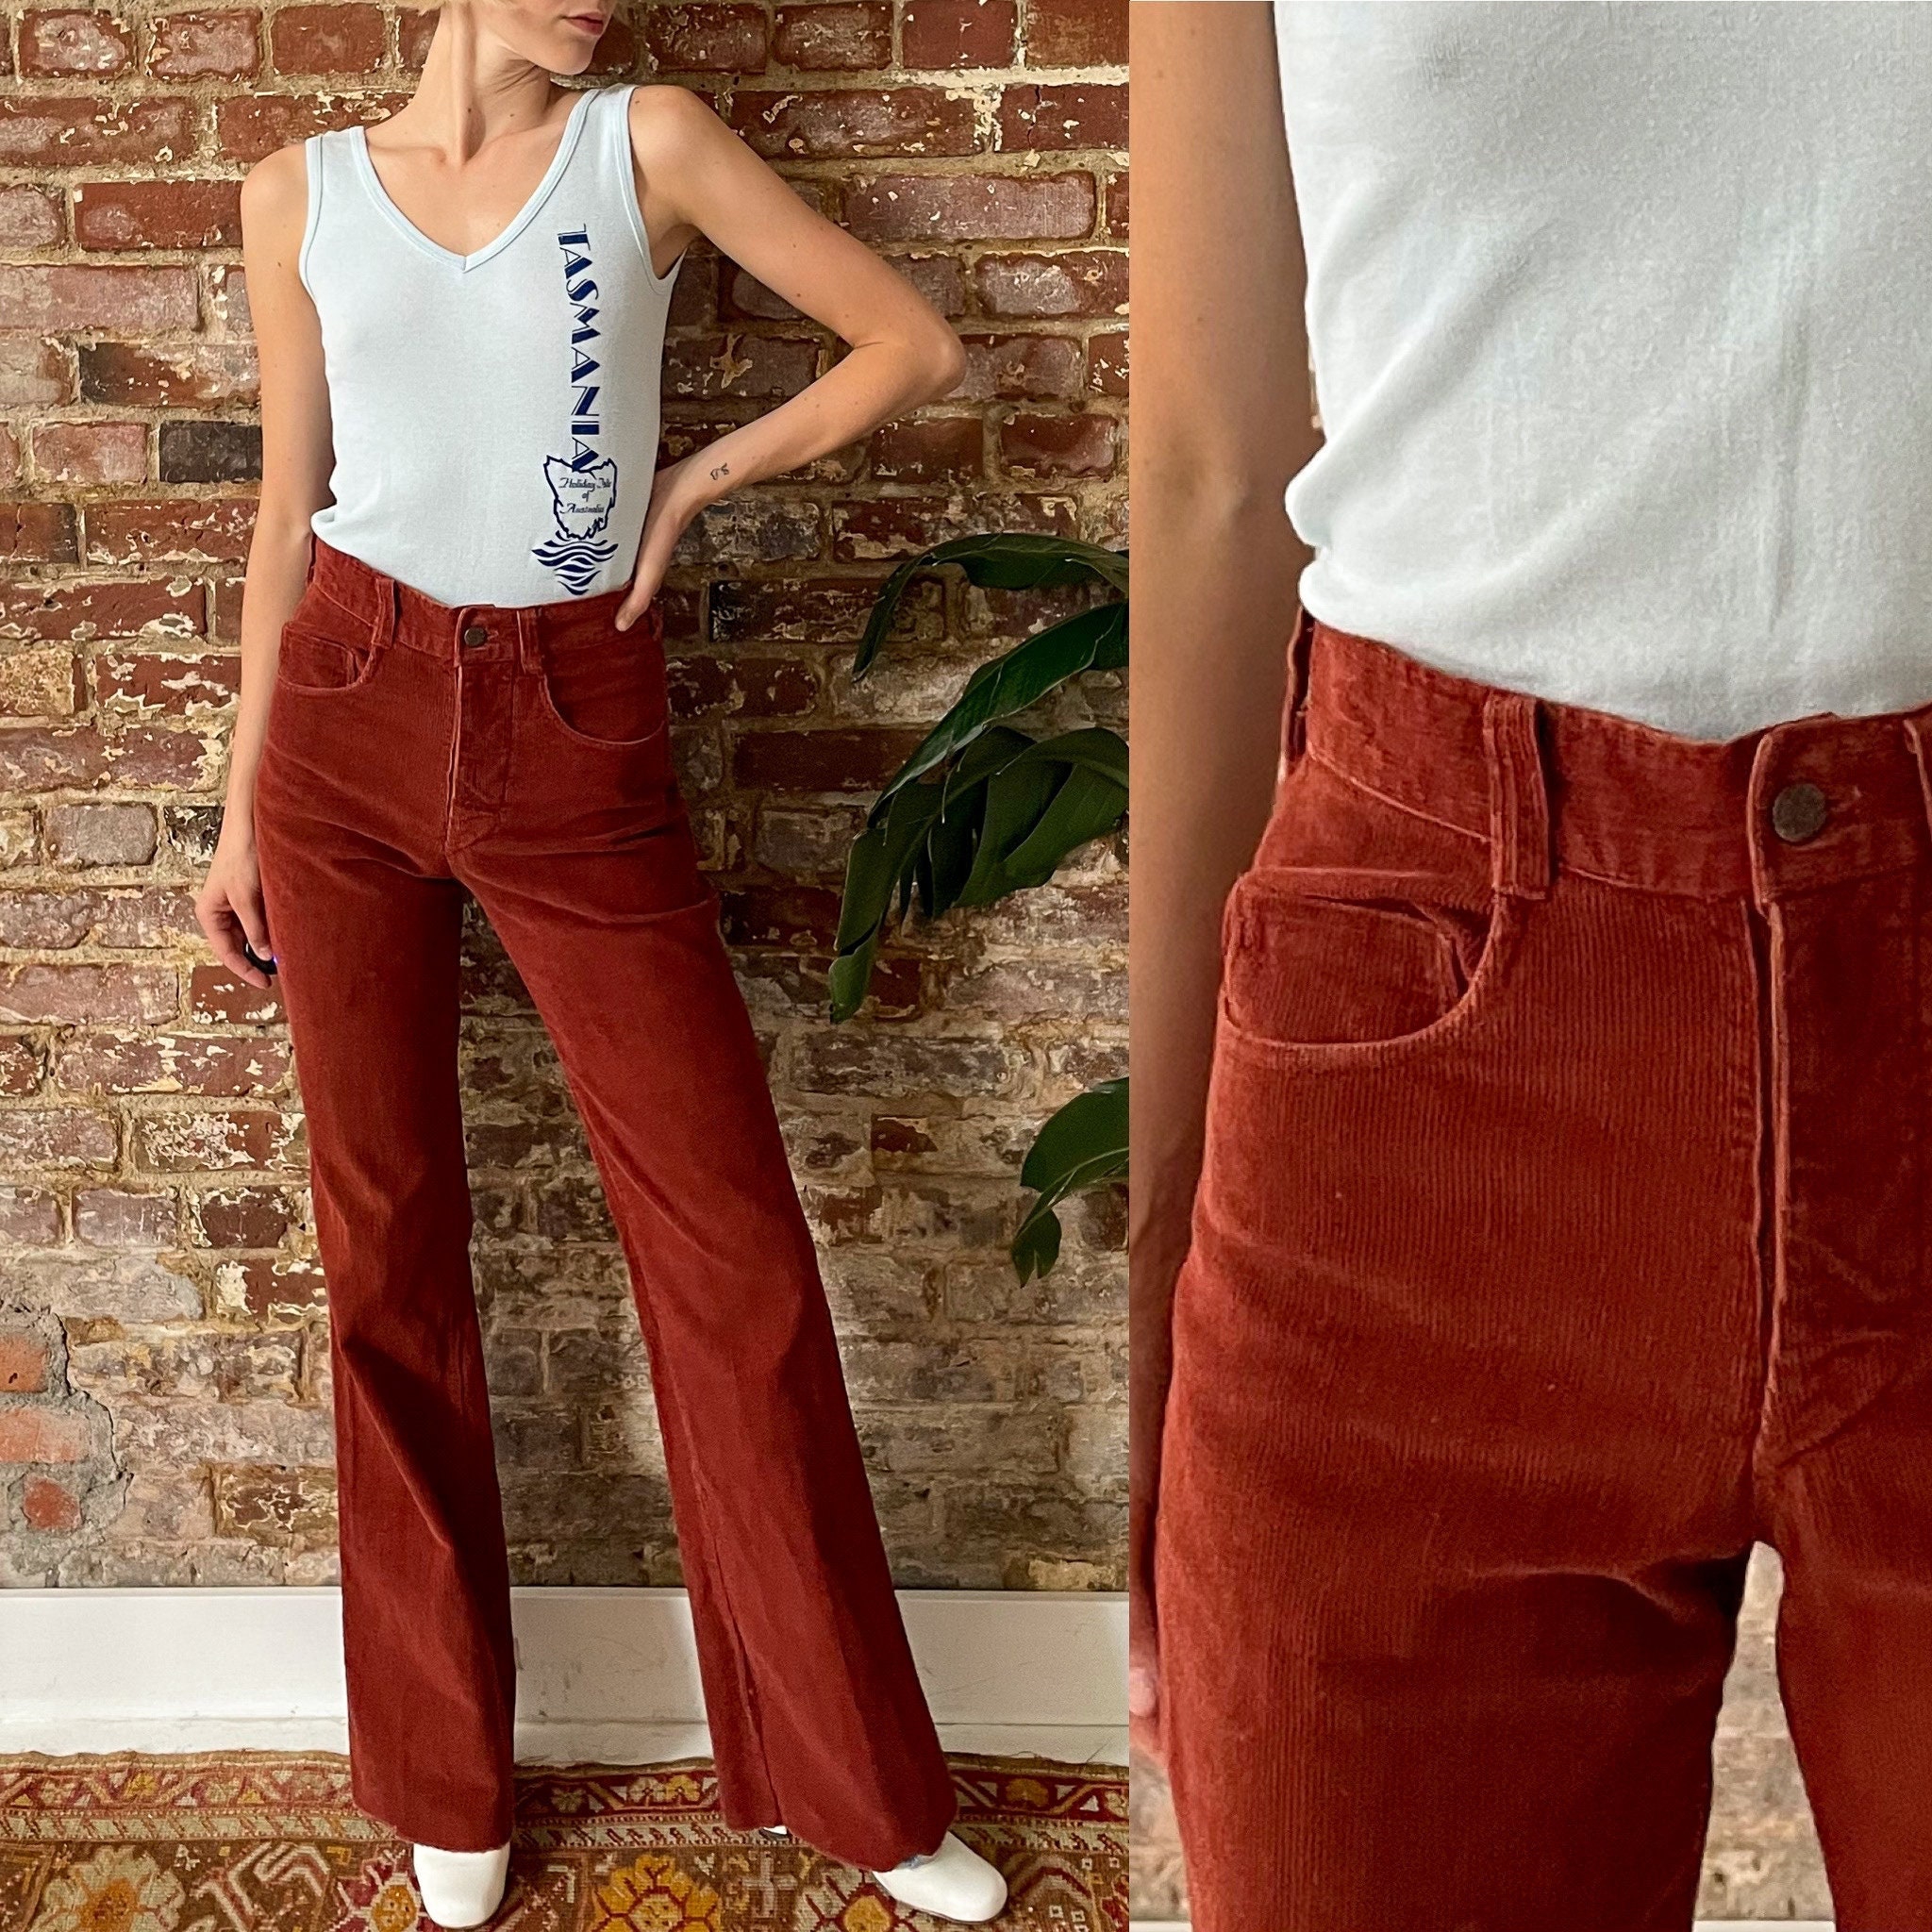 Vintage 1970s Rust Corduroy Bell Bottoms - 70s Hudson's Bay Company Rust  Red Orange Mid-Rise Cord Flares - 27 Waist 36 Hip